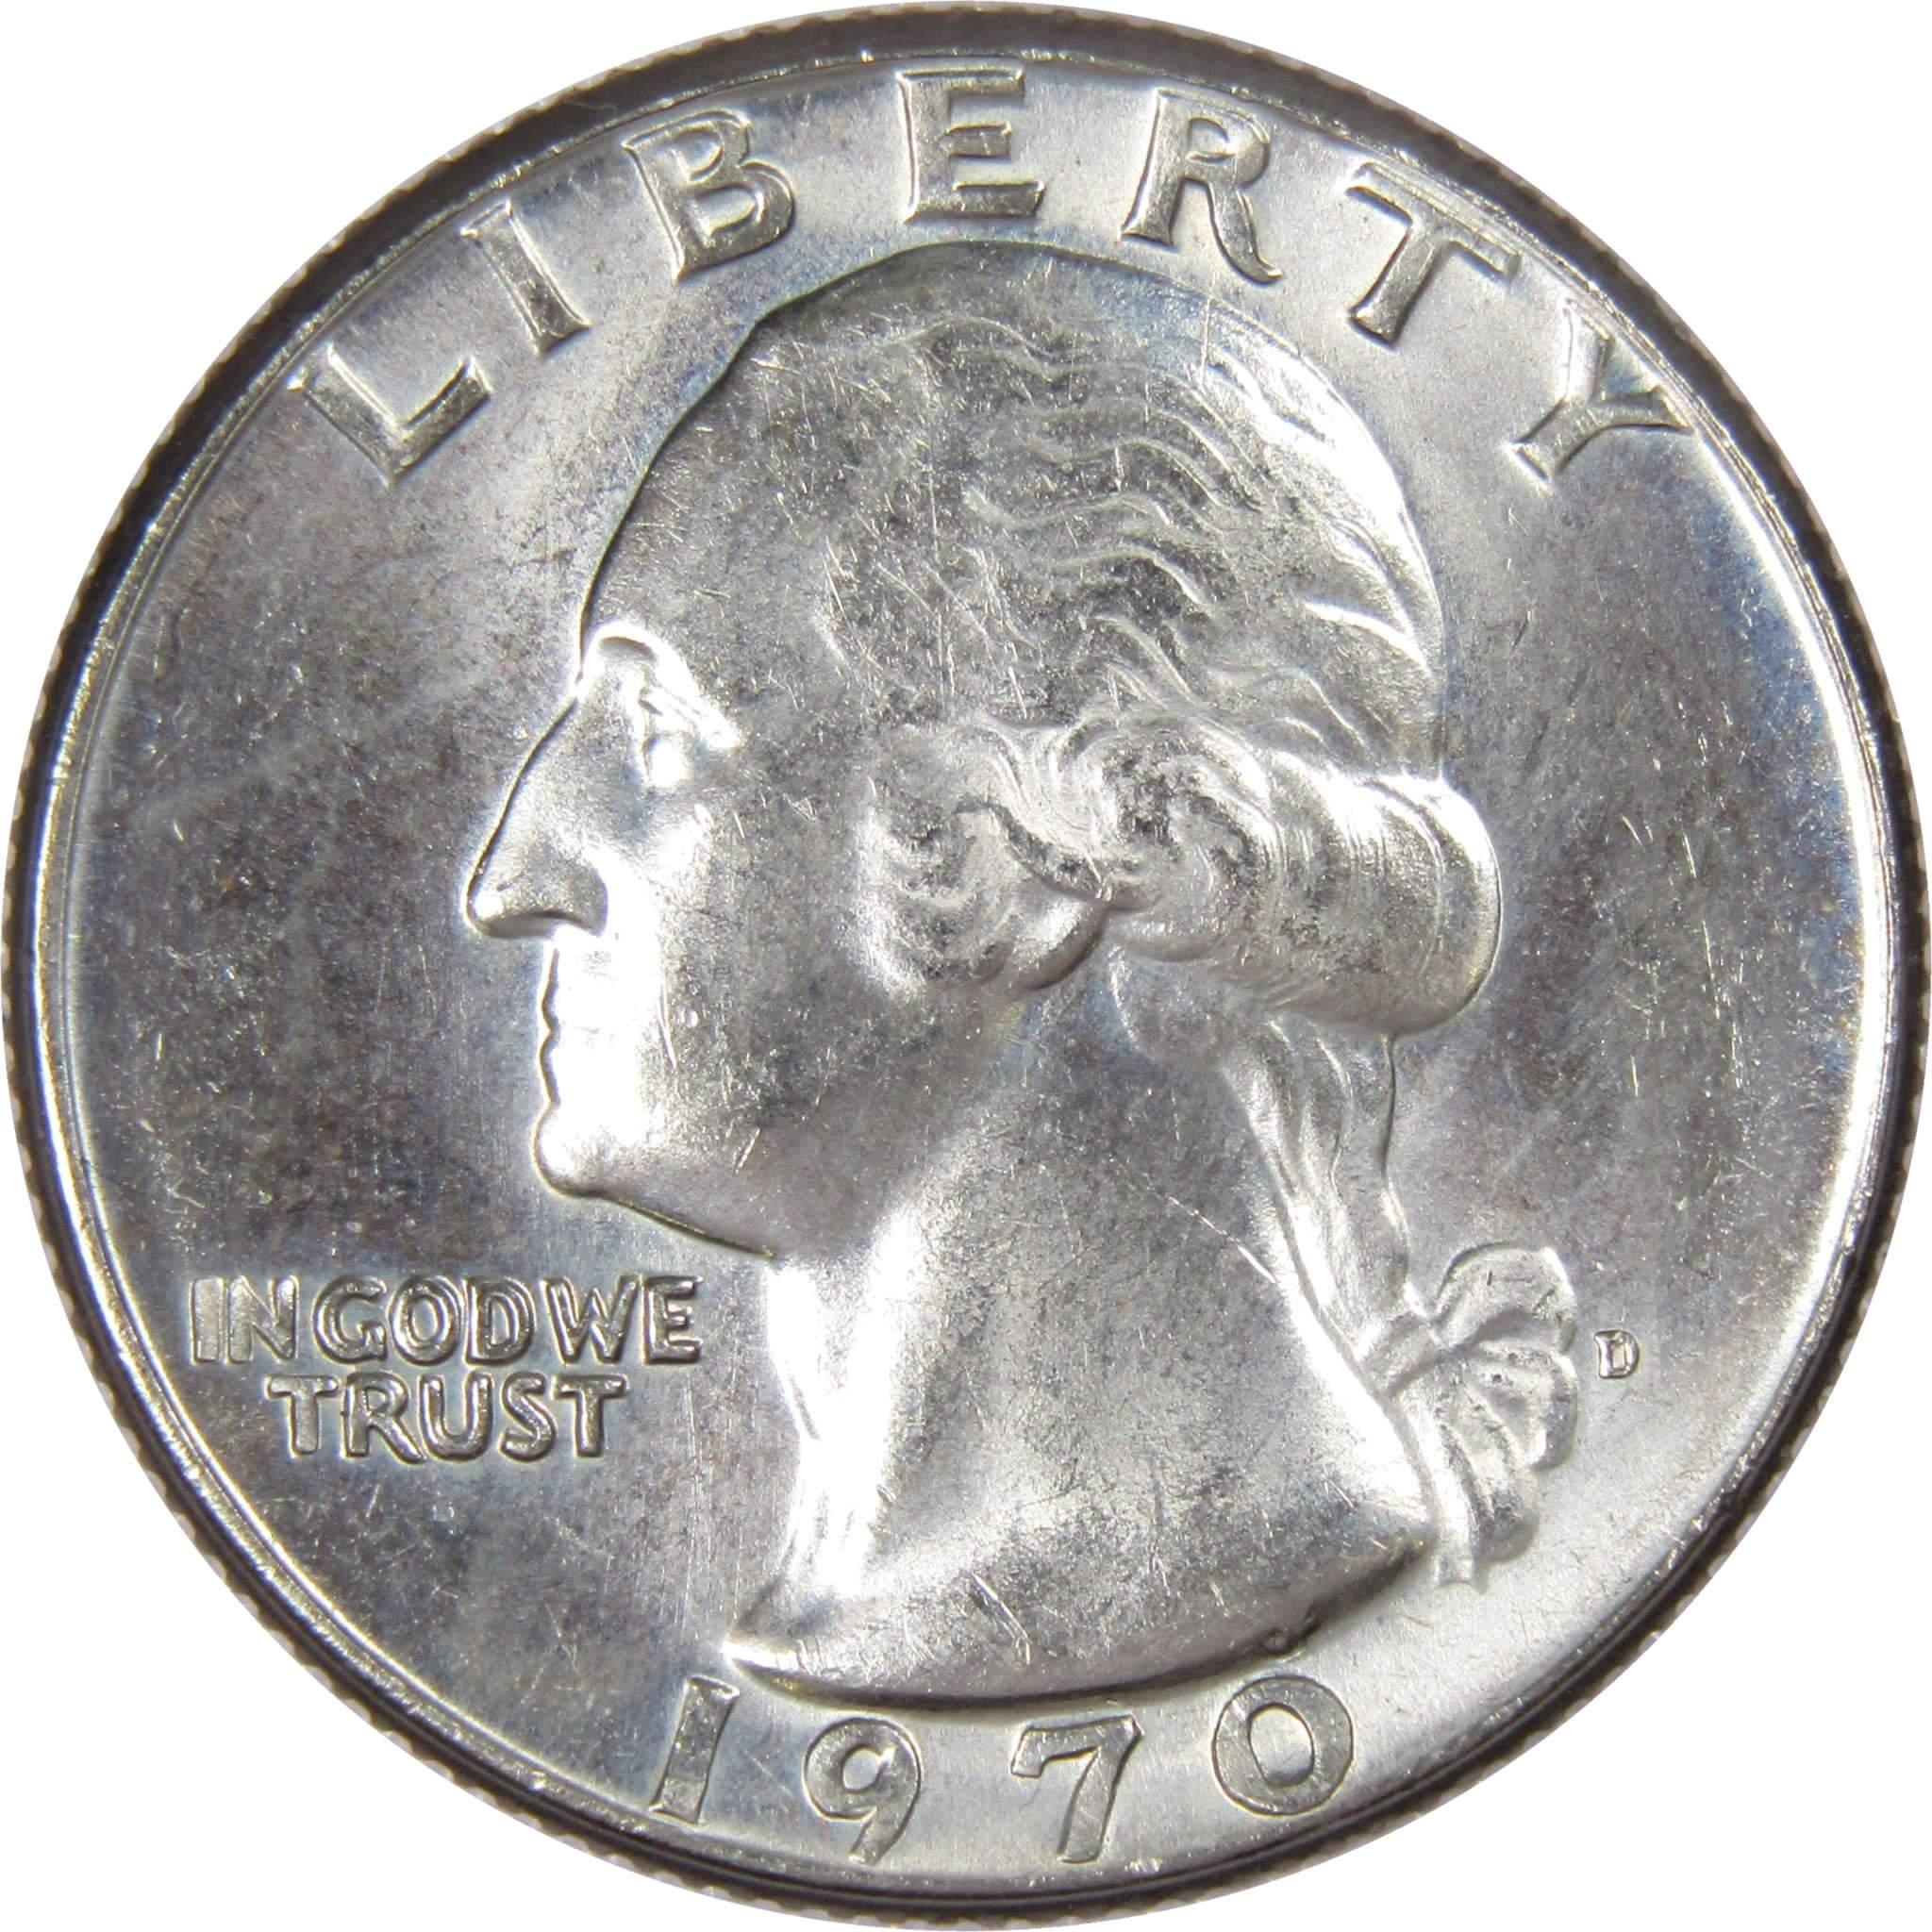 1970 D Washington Quarter BU Uncirculated Mint State 25c US Coin Collectible